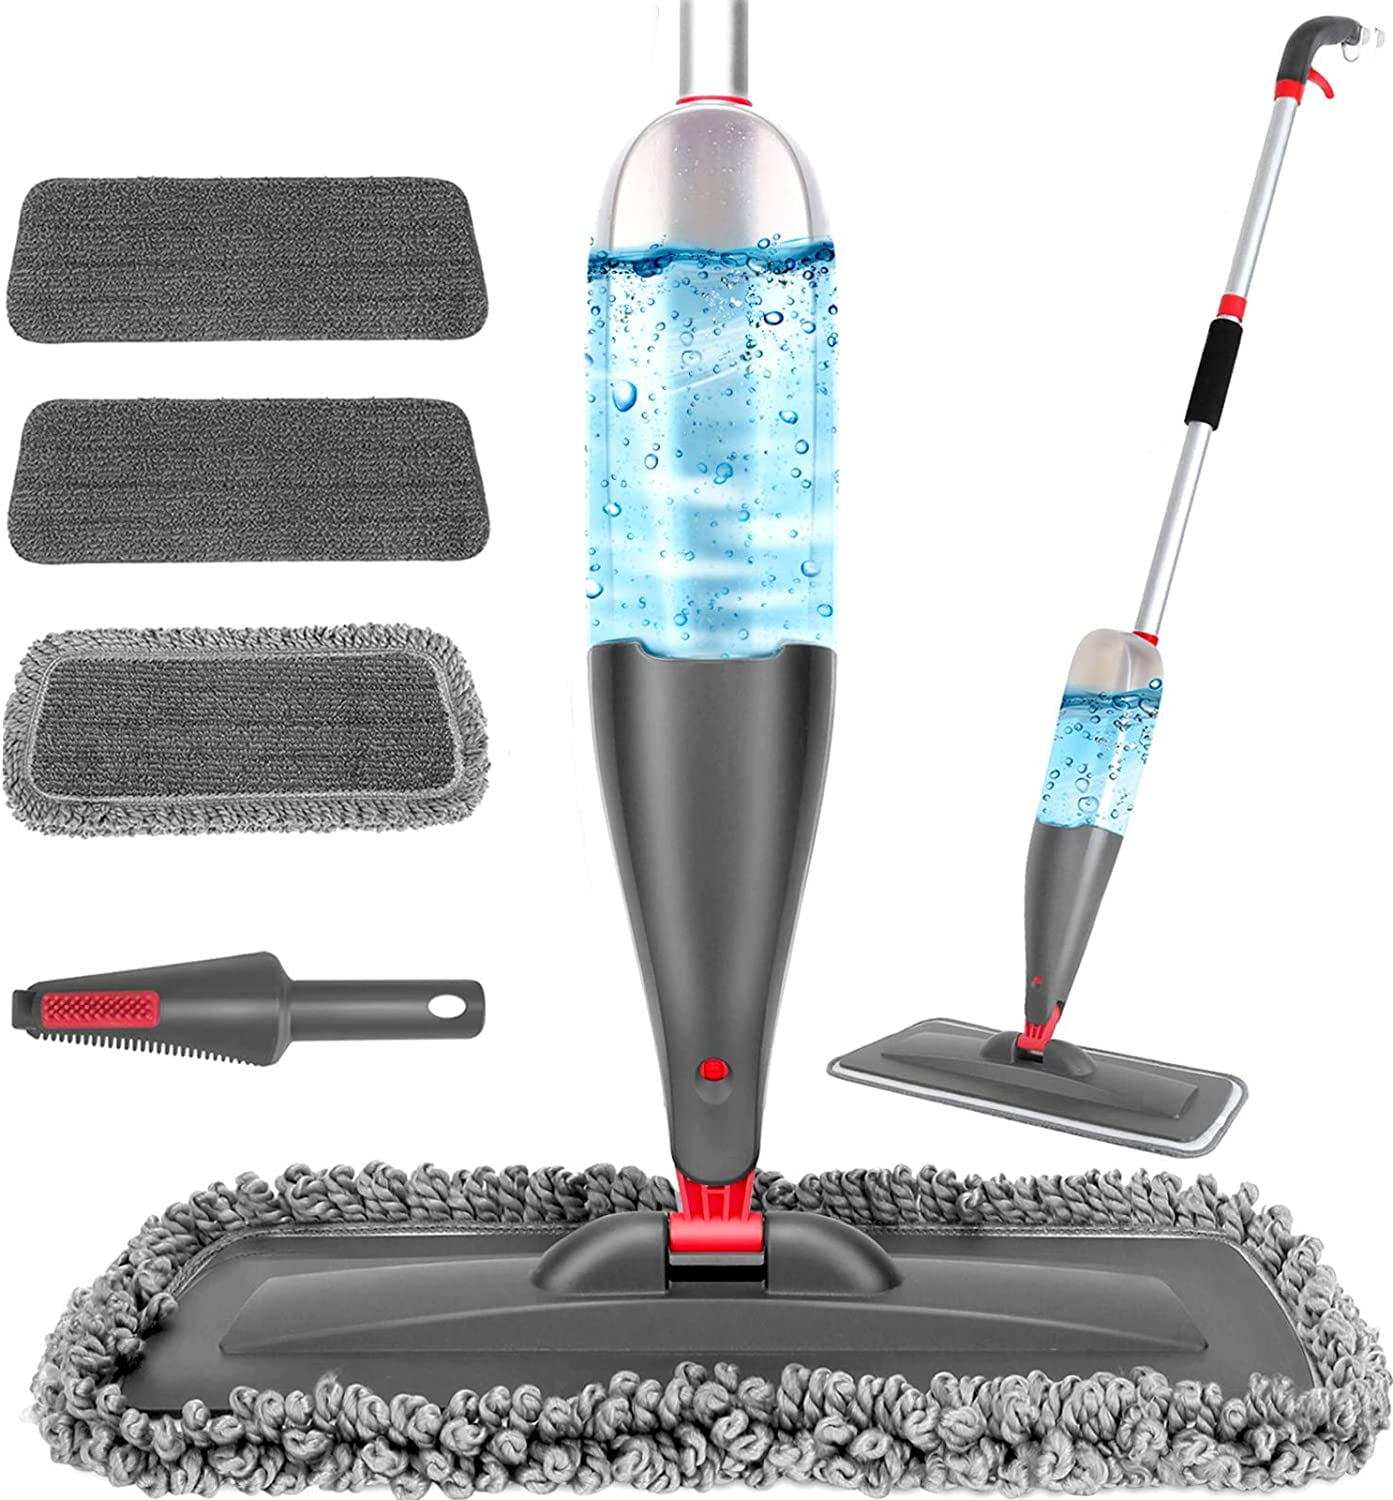 TMA Spray Mop T30, Mop for Floor Cleaning with 2 Microfiber Washable Pads  and 14 oz Refill Bottle, Floor Mop for Hardwood, Ceramic Tiles, Laminate,  Cement, and More - Red and White 